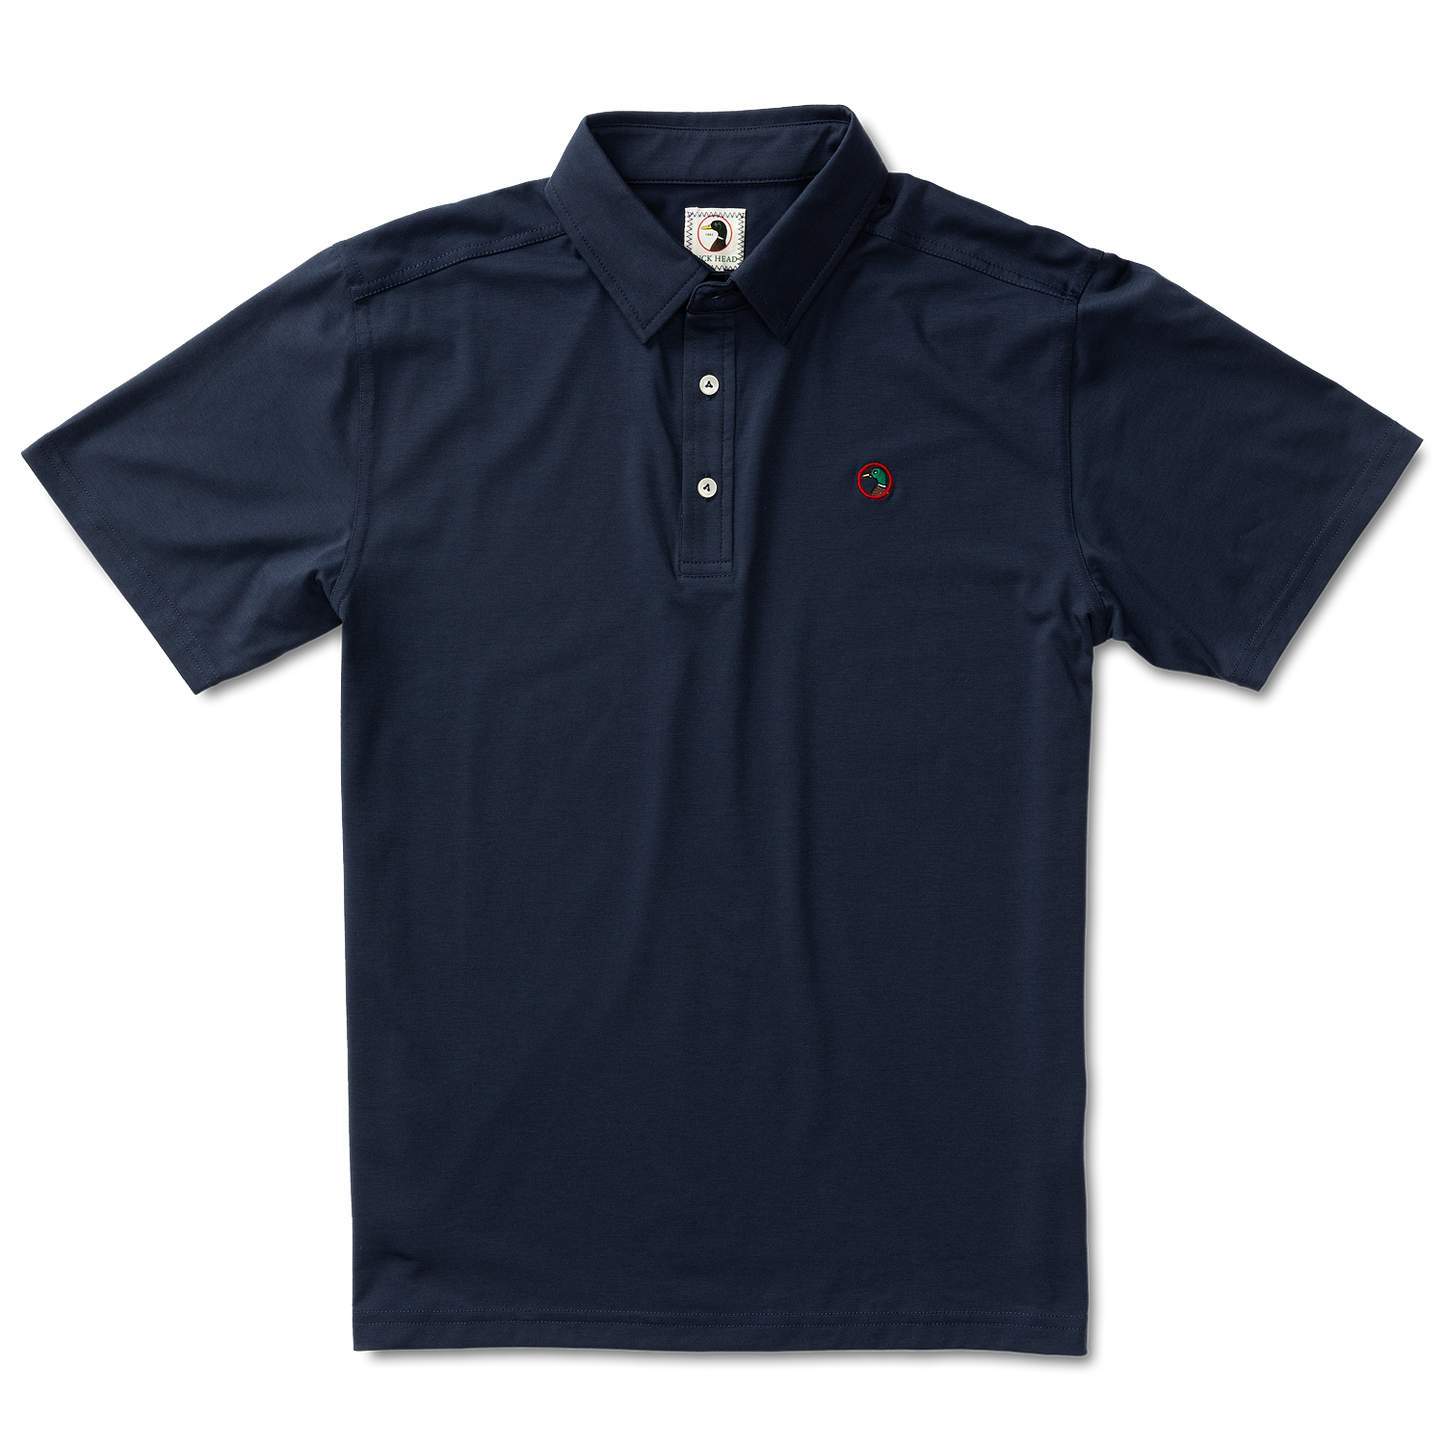 Hayes Performance Polo